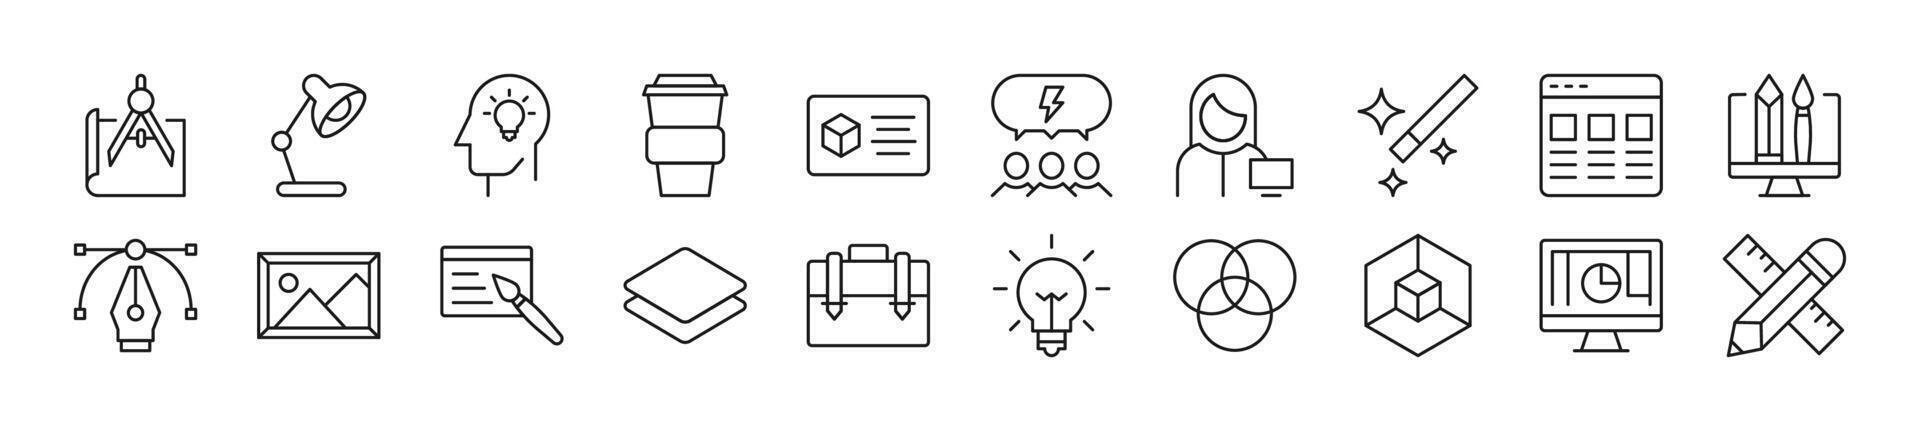 Web designer Linear vector icons collection. Editable stroke. Simple linear illustration for web sites, newspapers, articles book